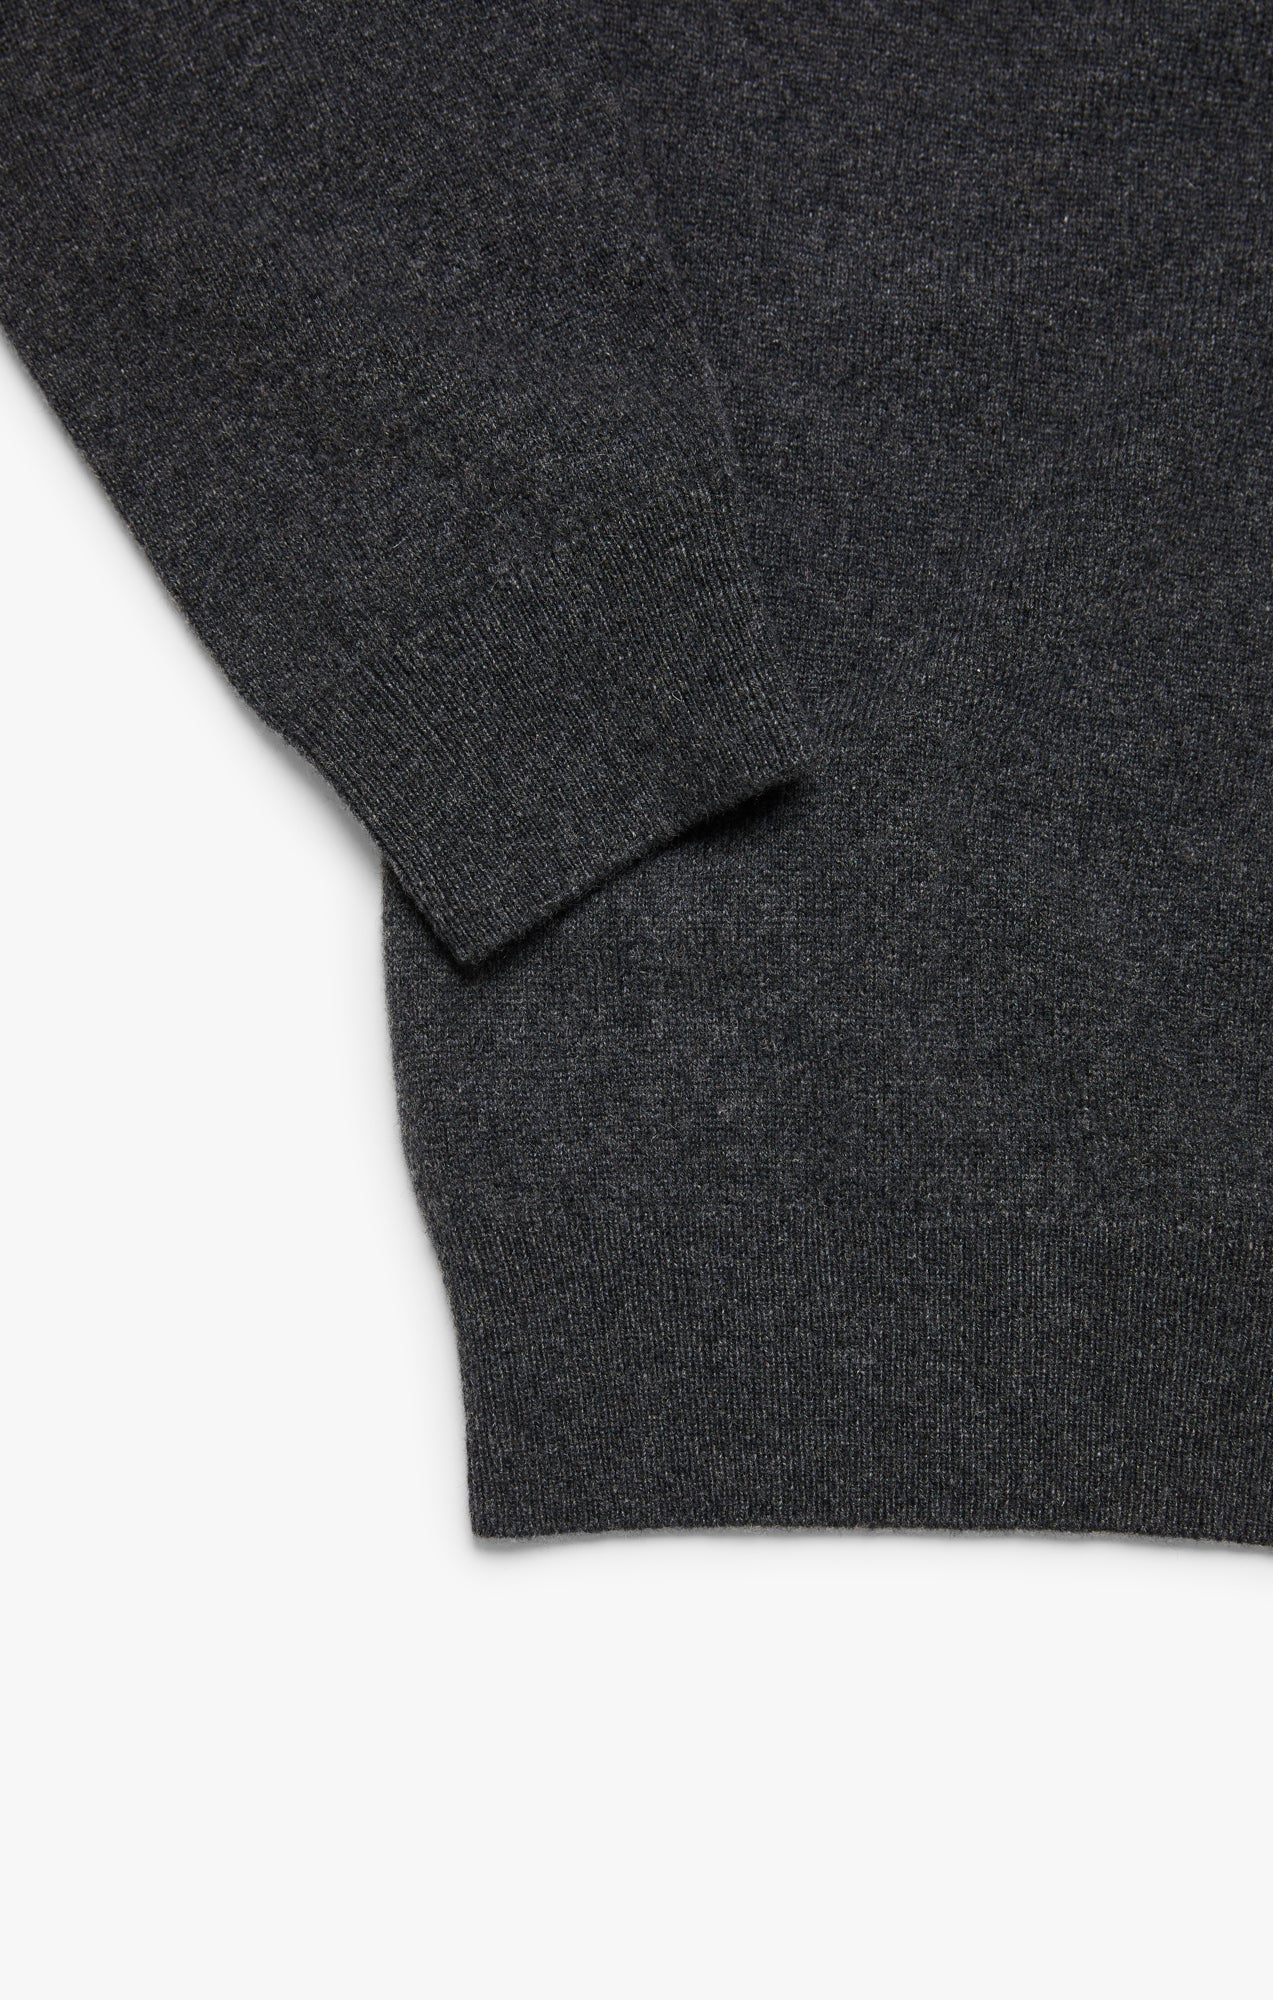 Cashmere Crew Neck Sweater In Charcoal Image 9